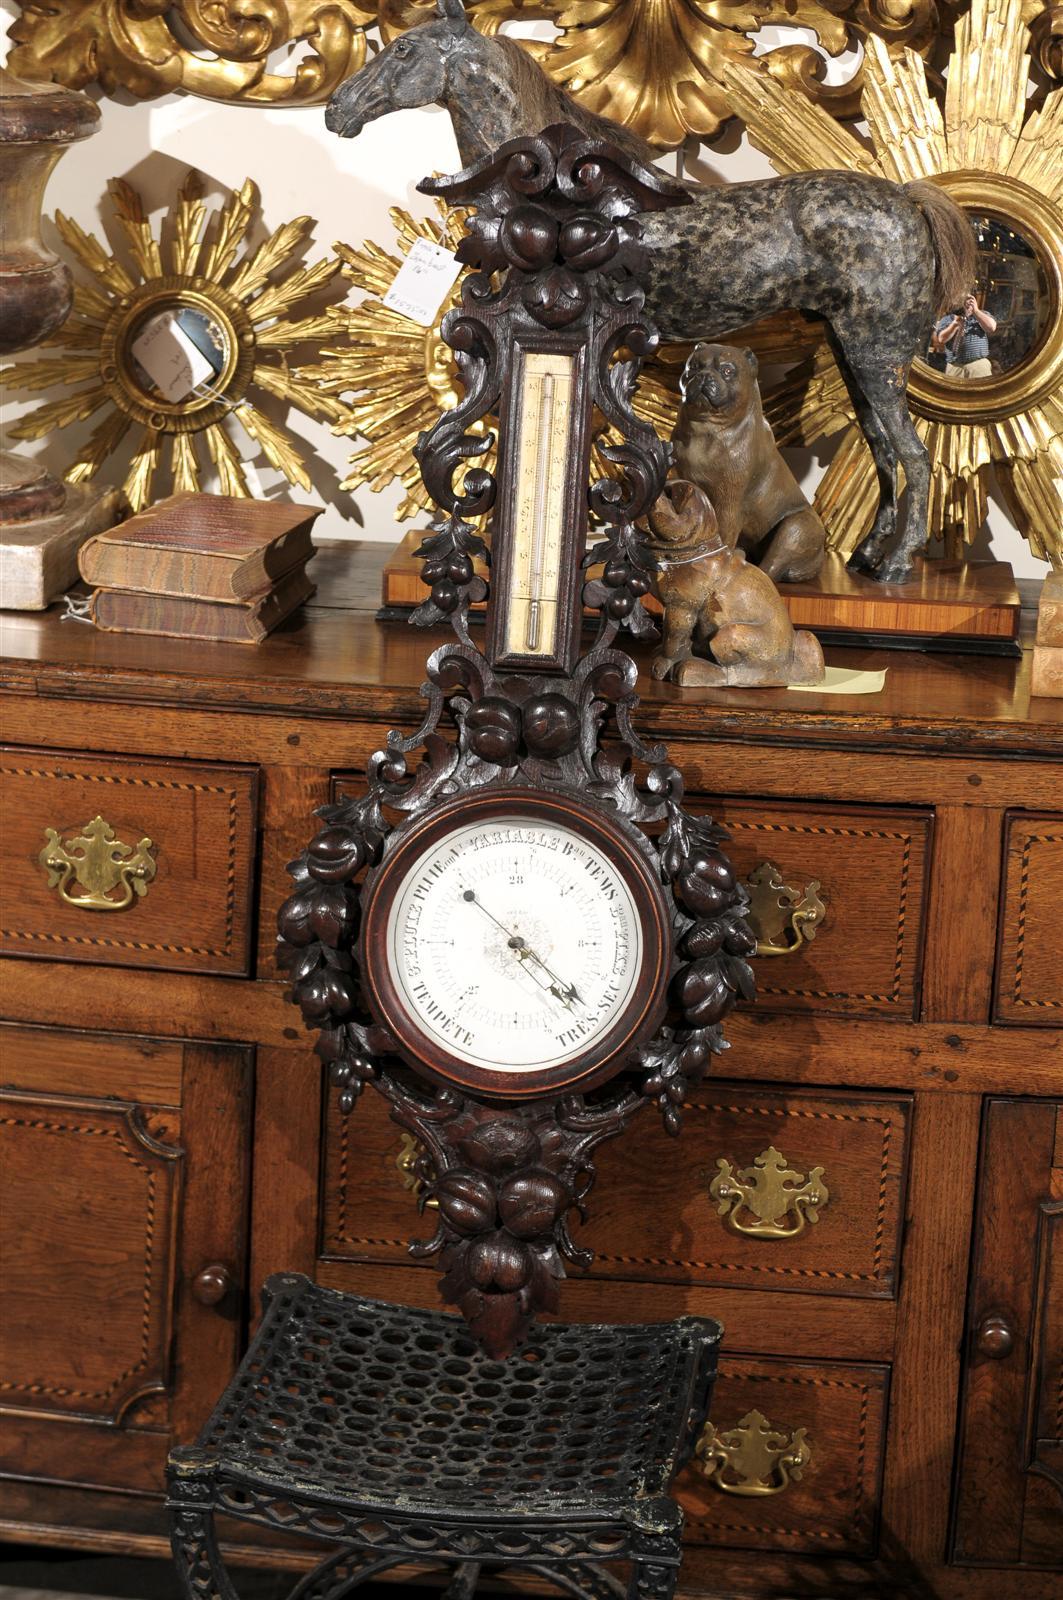 This French Black Forest barometer from the turn of the century (19th to 20th) features a wonderfully hand-carved frame, made of various foliage and volutes. Contrasting nicely with the dark finish of the carved wood, the barometer finds its place